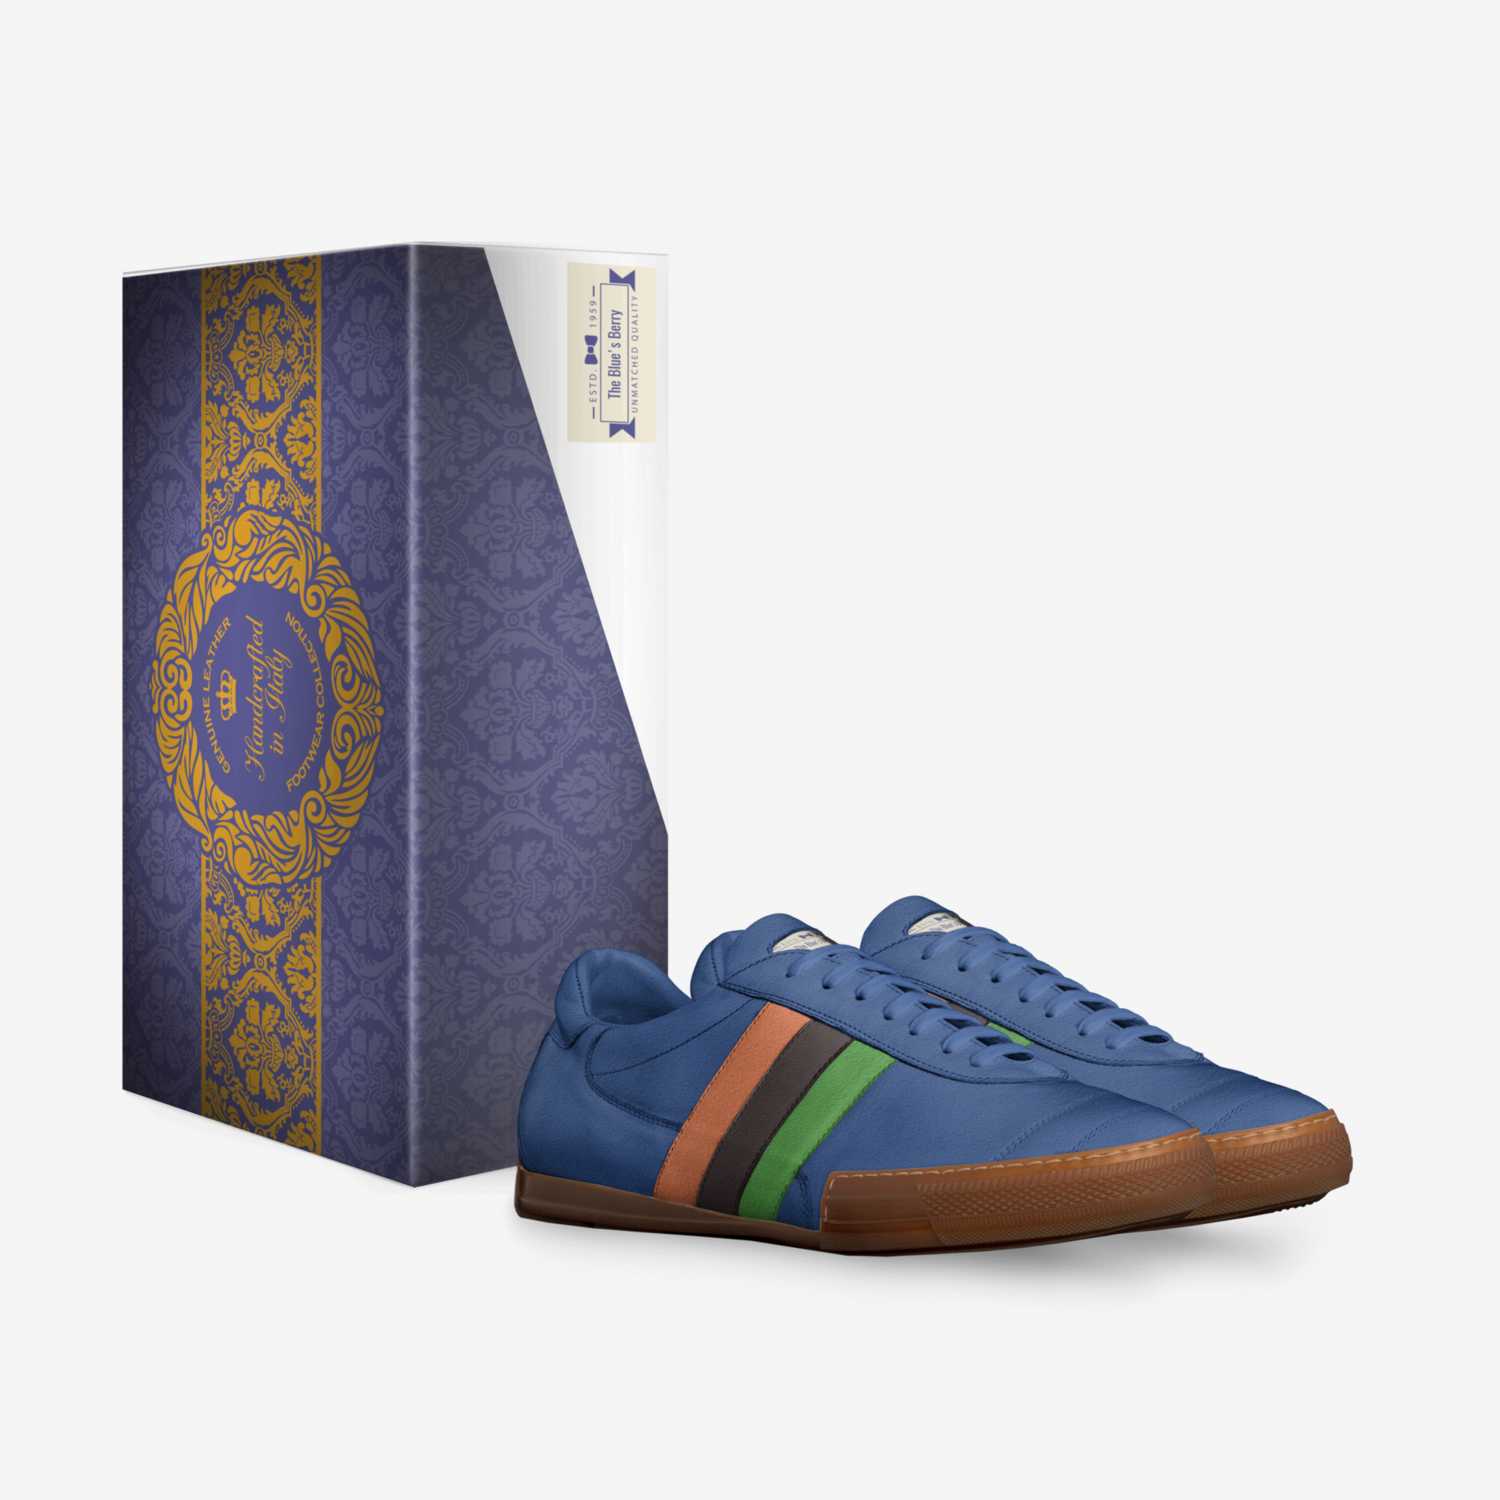 The Blue'sBerry custom made in Italy shoes by Alexander Bowie | Box view